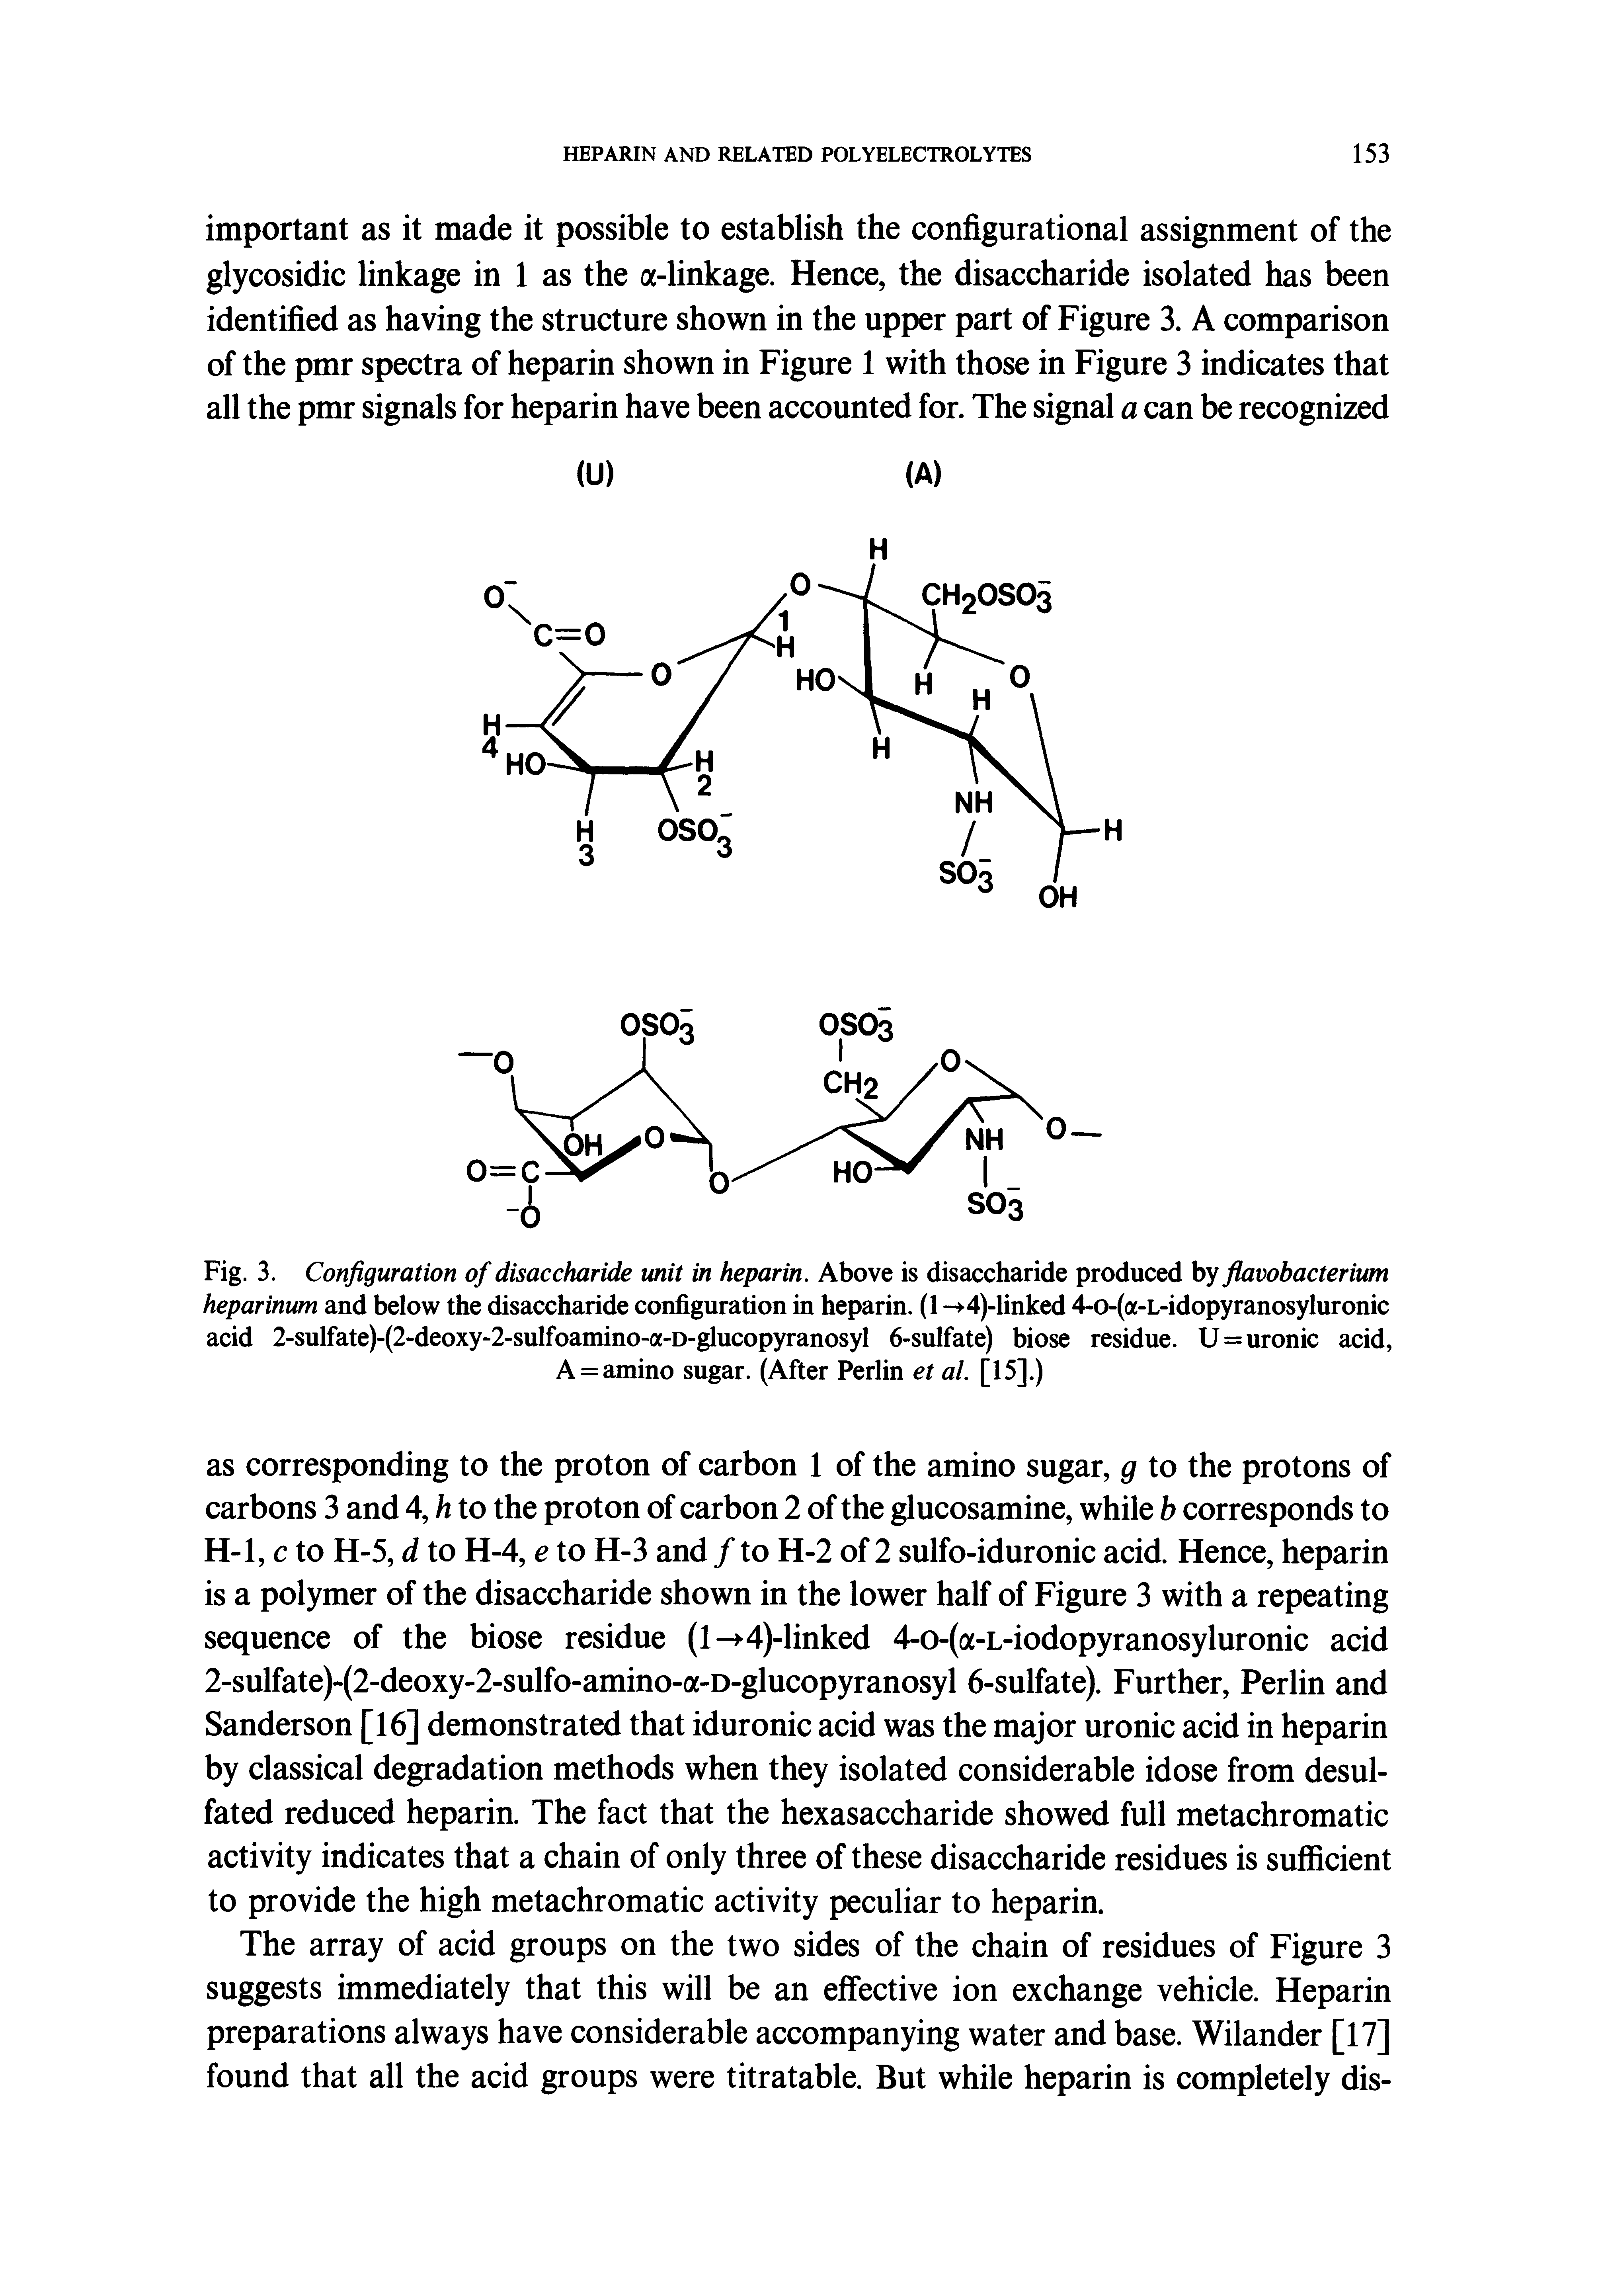 Fig. 3. Configuration of disaccharide unit in heparin. Above is disaccharide produced by flavobacterium heparinum and below the disaccharide configuration in heparin. (1 - 4)-linked 4-o-(a-L-idopyranosyluronic acid 2-sulfate)-(2-deoxy-2-sulfoamino-a-D-glucopyranosyl 6-sulfate) biose residue. U=uronic acid, A = amino sugar. (After Perlin et al. [15].)...